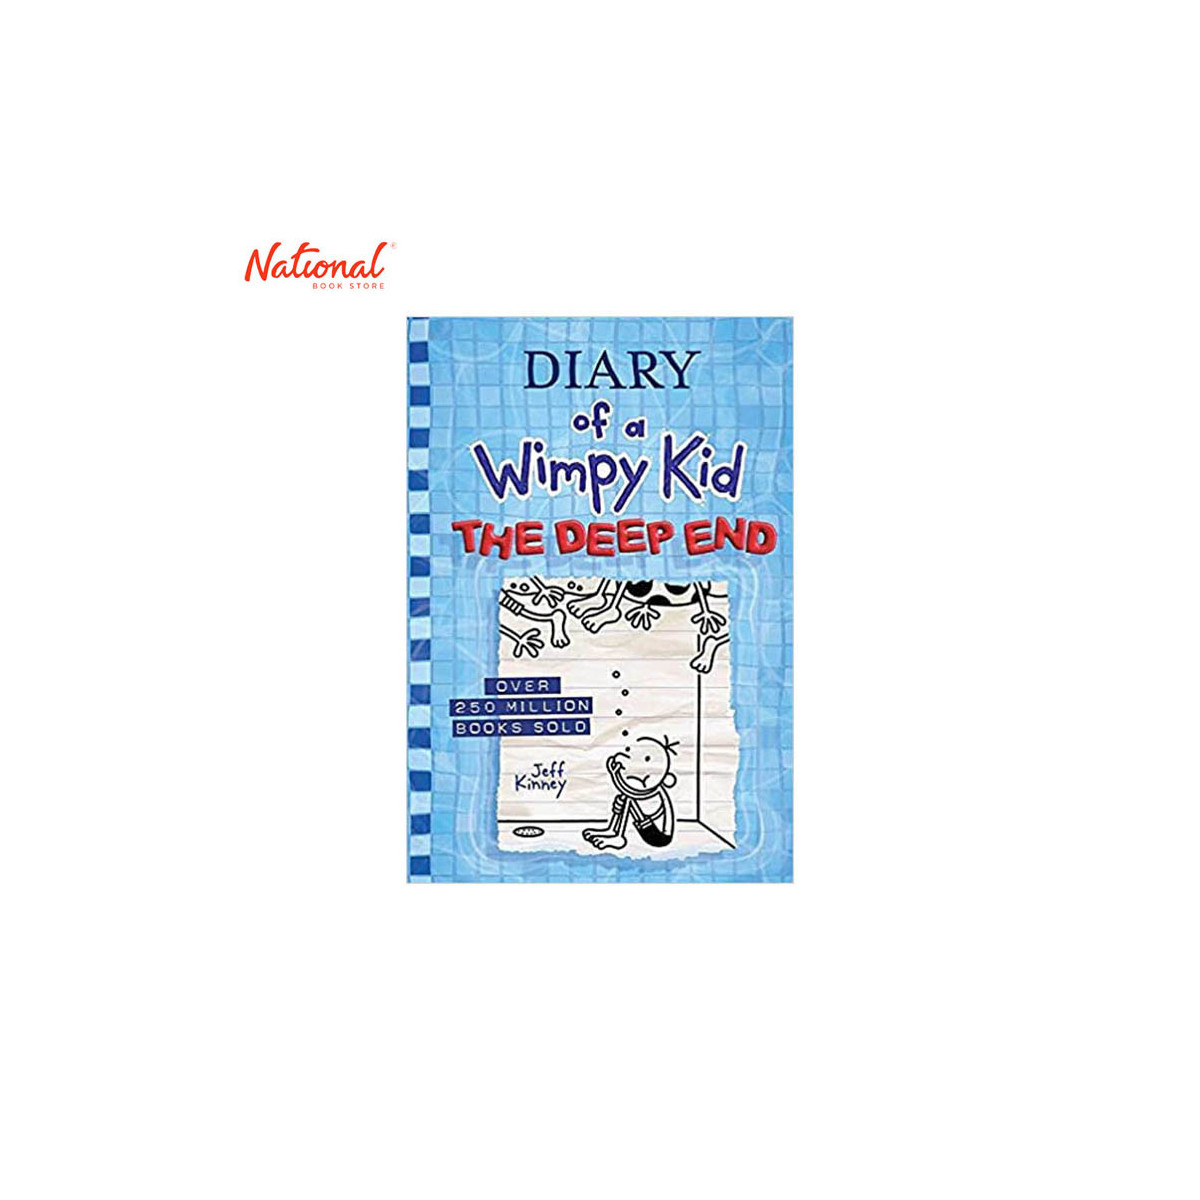 Diary of a Wimpy Kid 15: The Deep End Export Edition Trade Paperback by Jeff Kinney